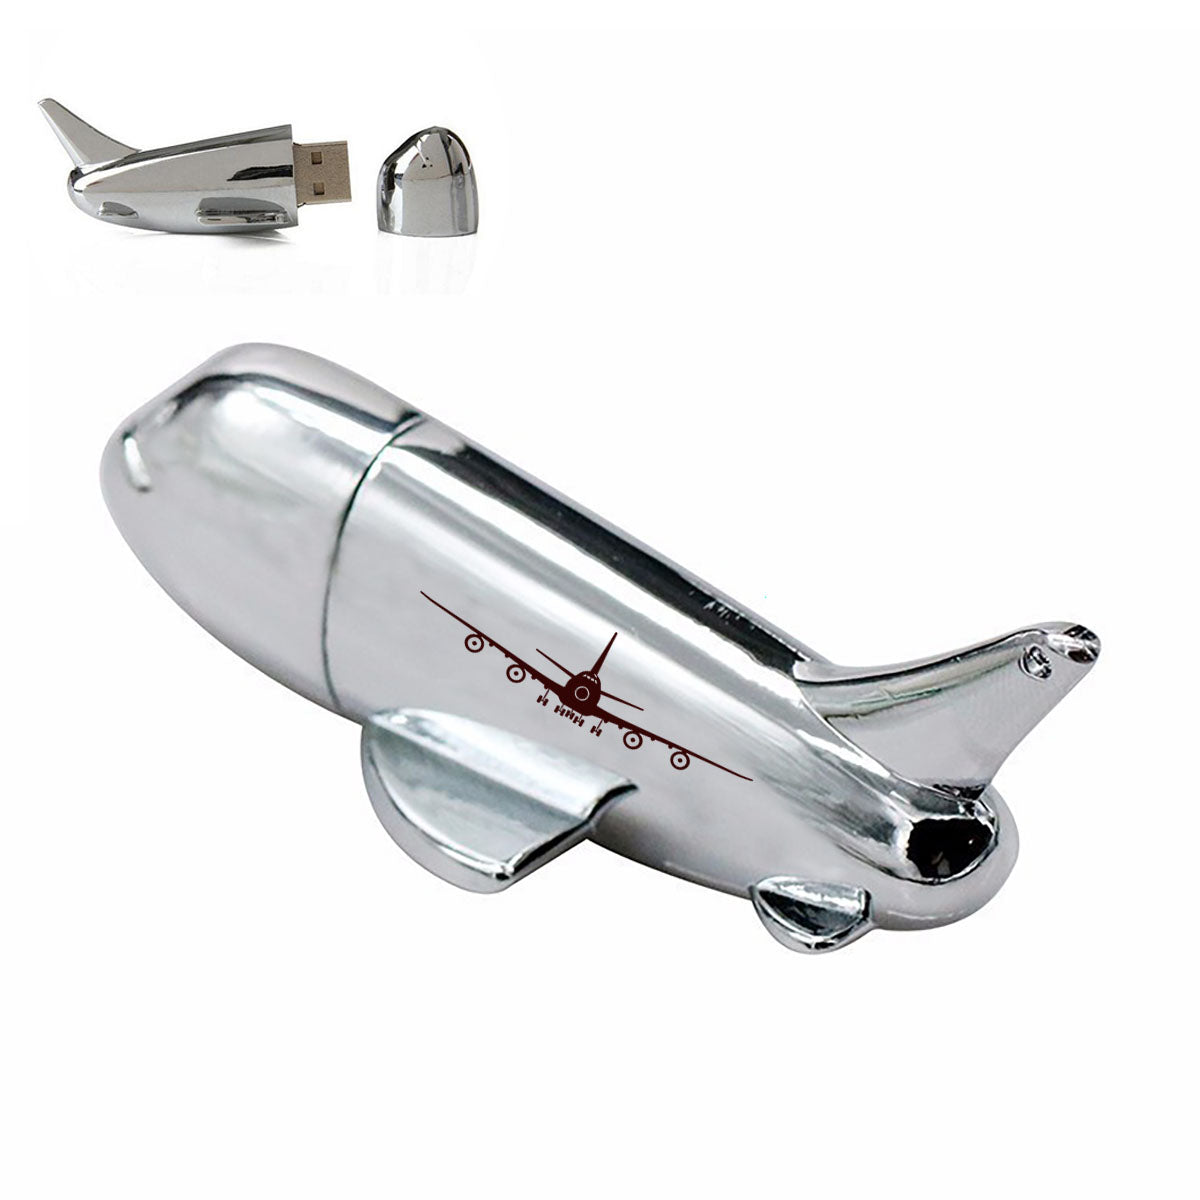 Boeing 747 Silhouette Designed Airplane Shape USB Drives